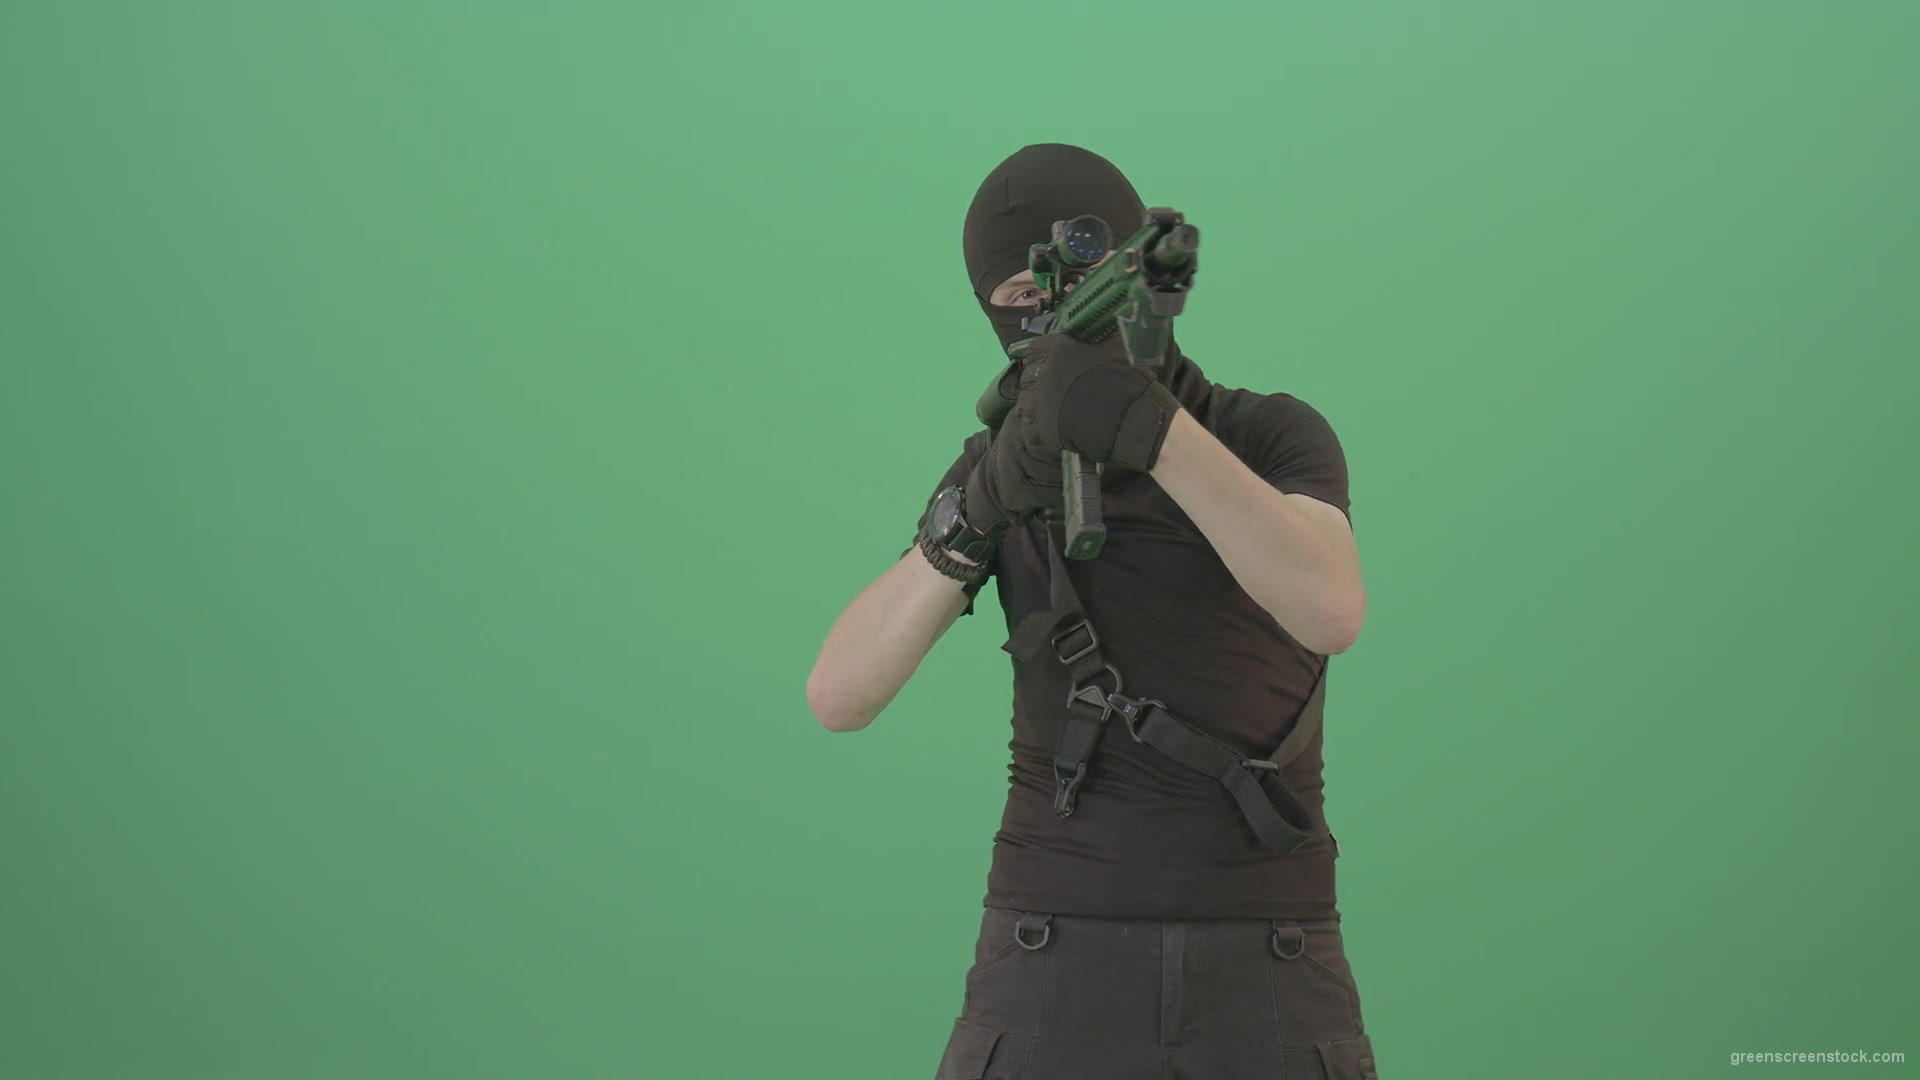 Soldier-in-black-mask-shooting-enemies-with-military-gun-on-green-screen-4K-Video-Footage-1920_005 Green Screen Stock